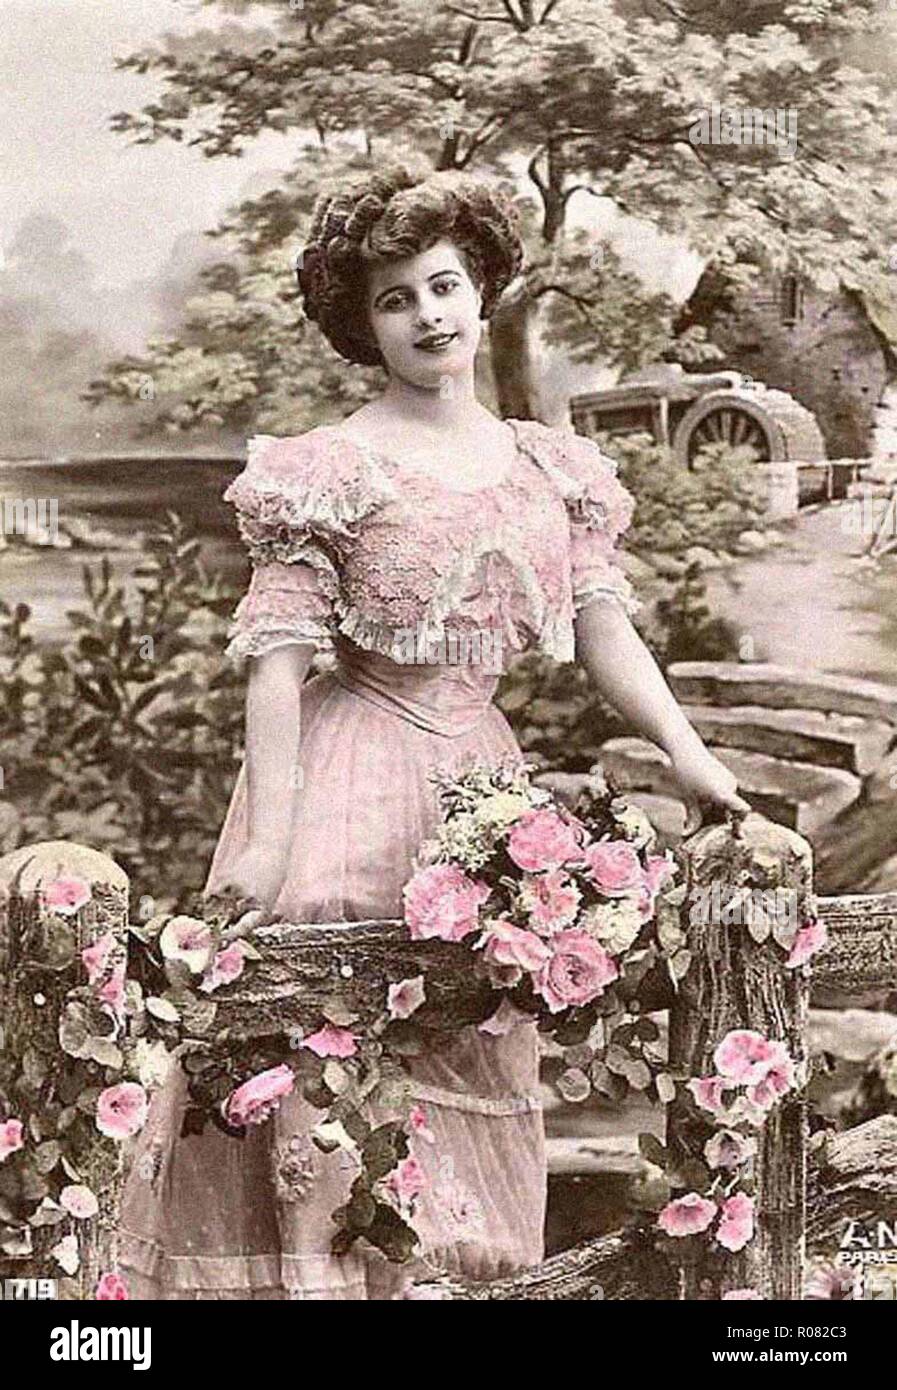 beautiful photo of a vintage victorian lady in period costume